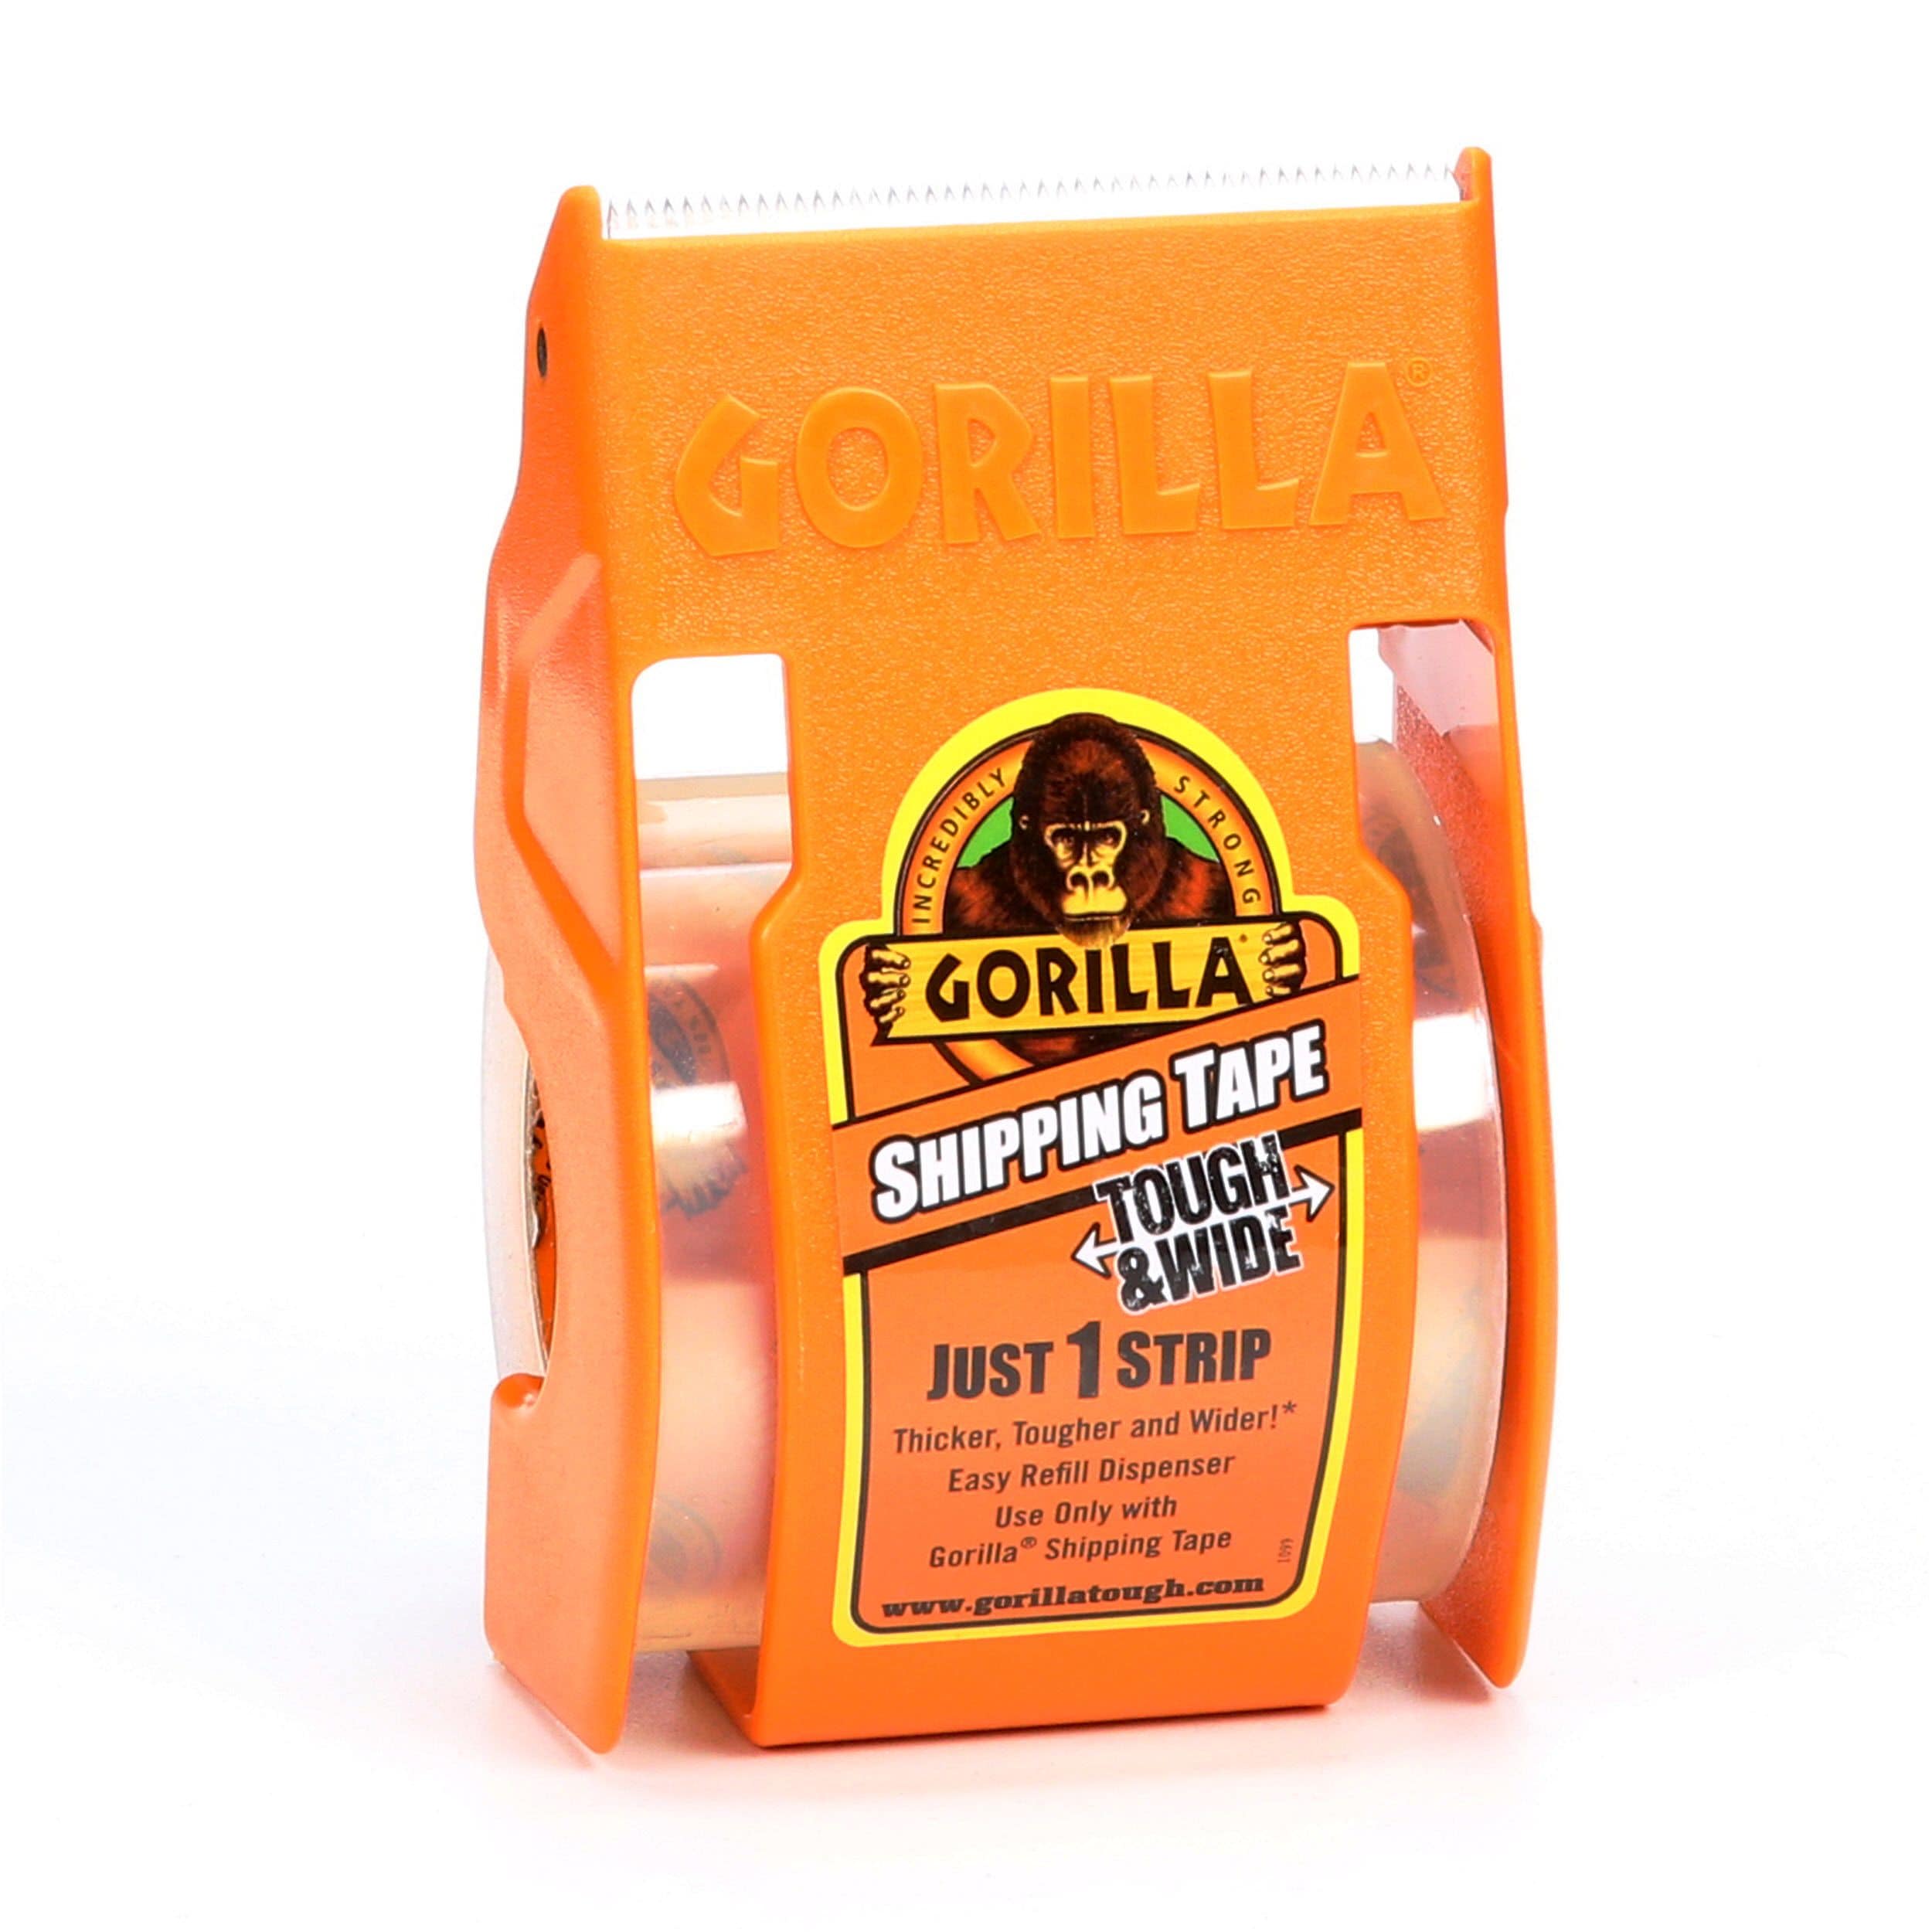 Gorilla Glue 6020001 Shipping Tape 2.83 inches wide x 35 yards long 